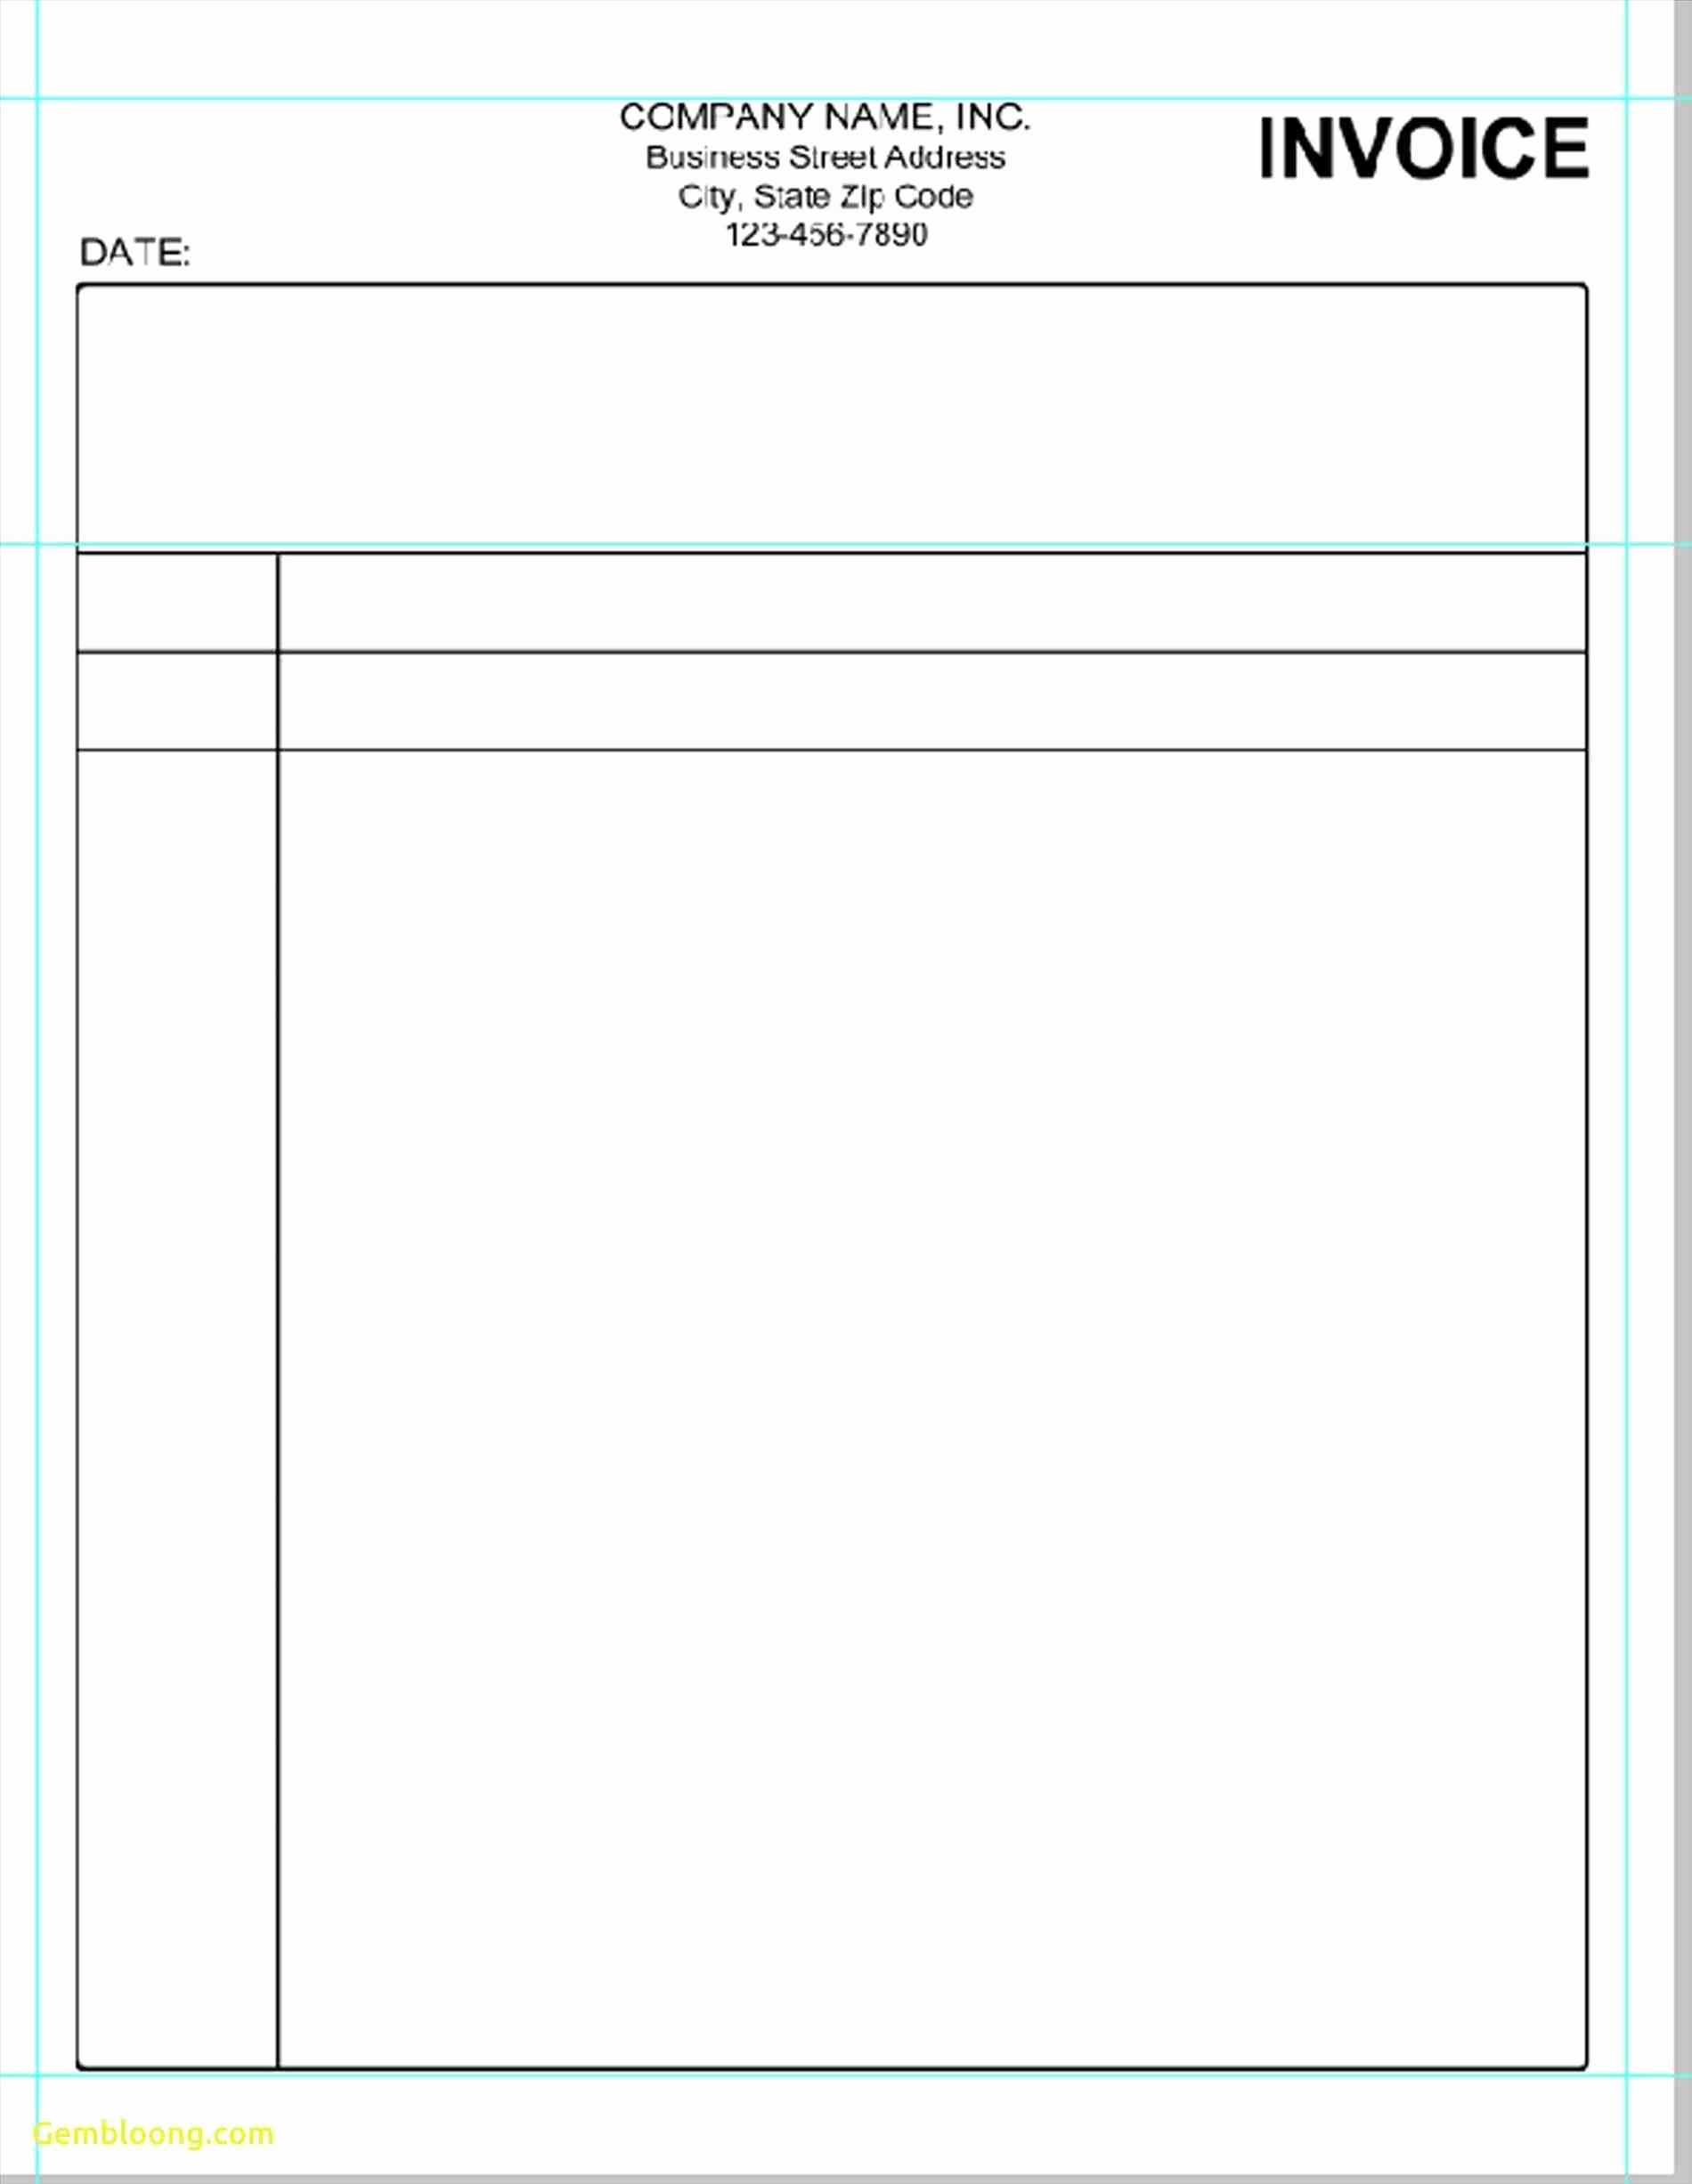 Free Blank Place Card Template Awesome Wedding Place Card Template Free Word Awesome Unique Blank